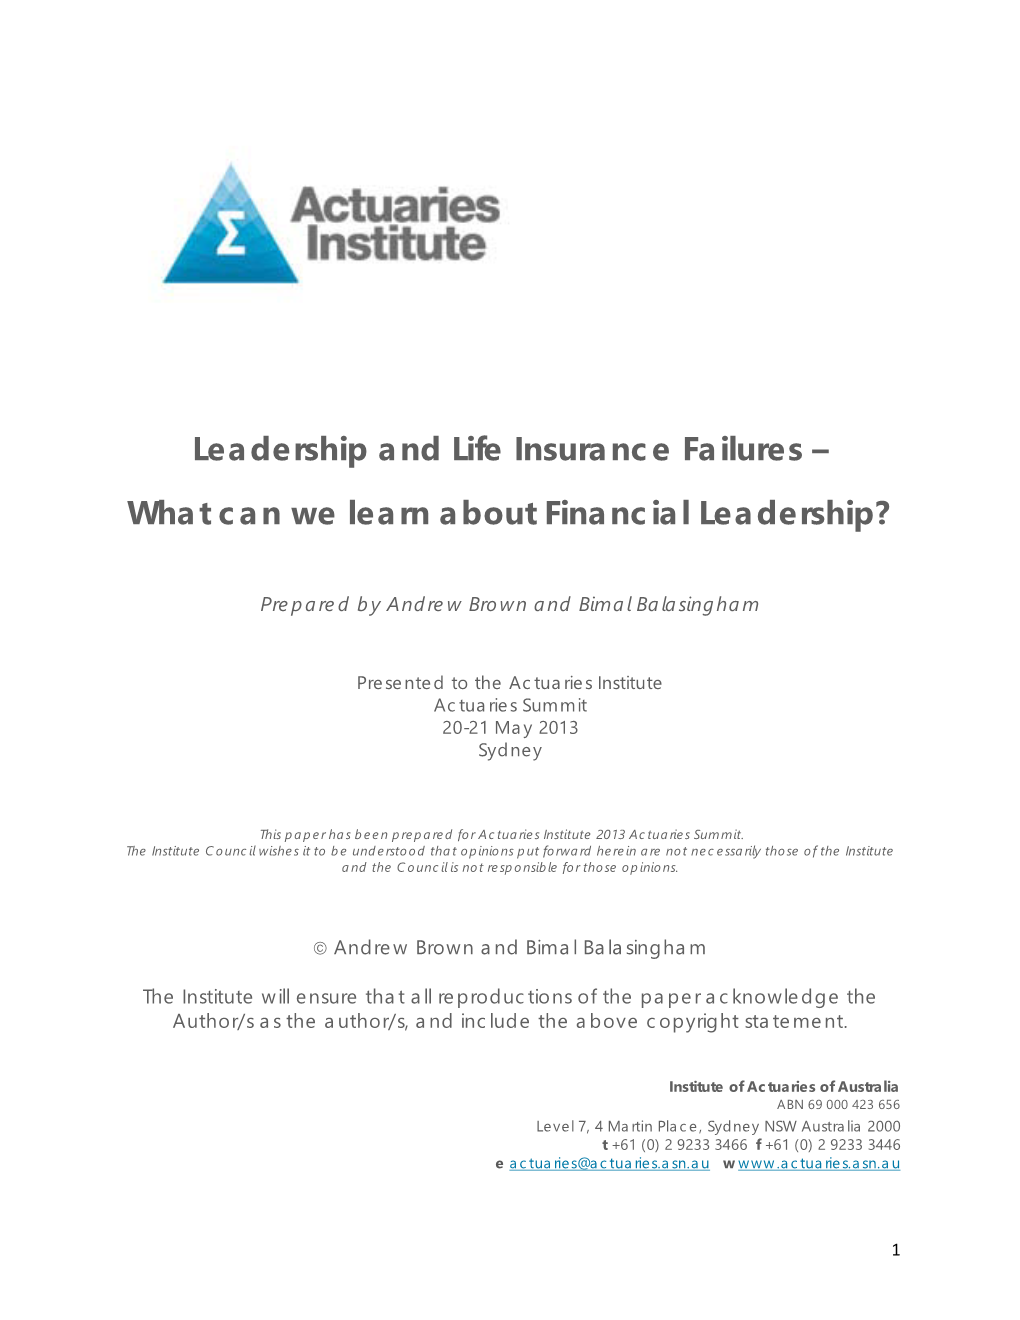 Leadership and Life Insurance Failures – What Can We Learn About Financial Leadership?